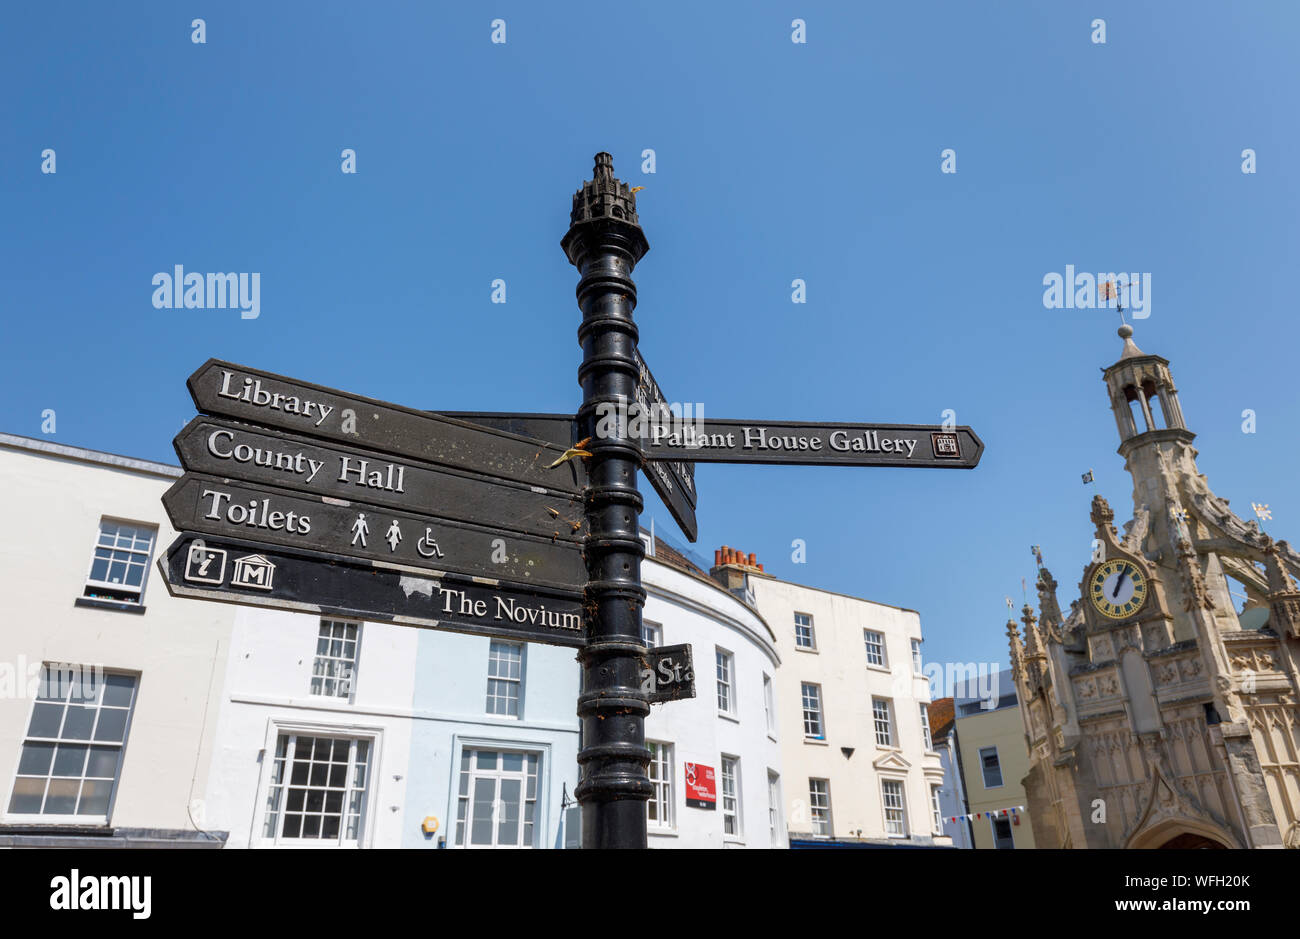 Direction sign to local amenties and attractions, West Street, Chichester, a city in and county town of West Sussex, south coast England, UK Stock Photo